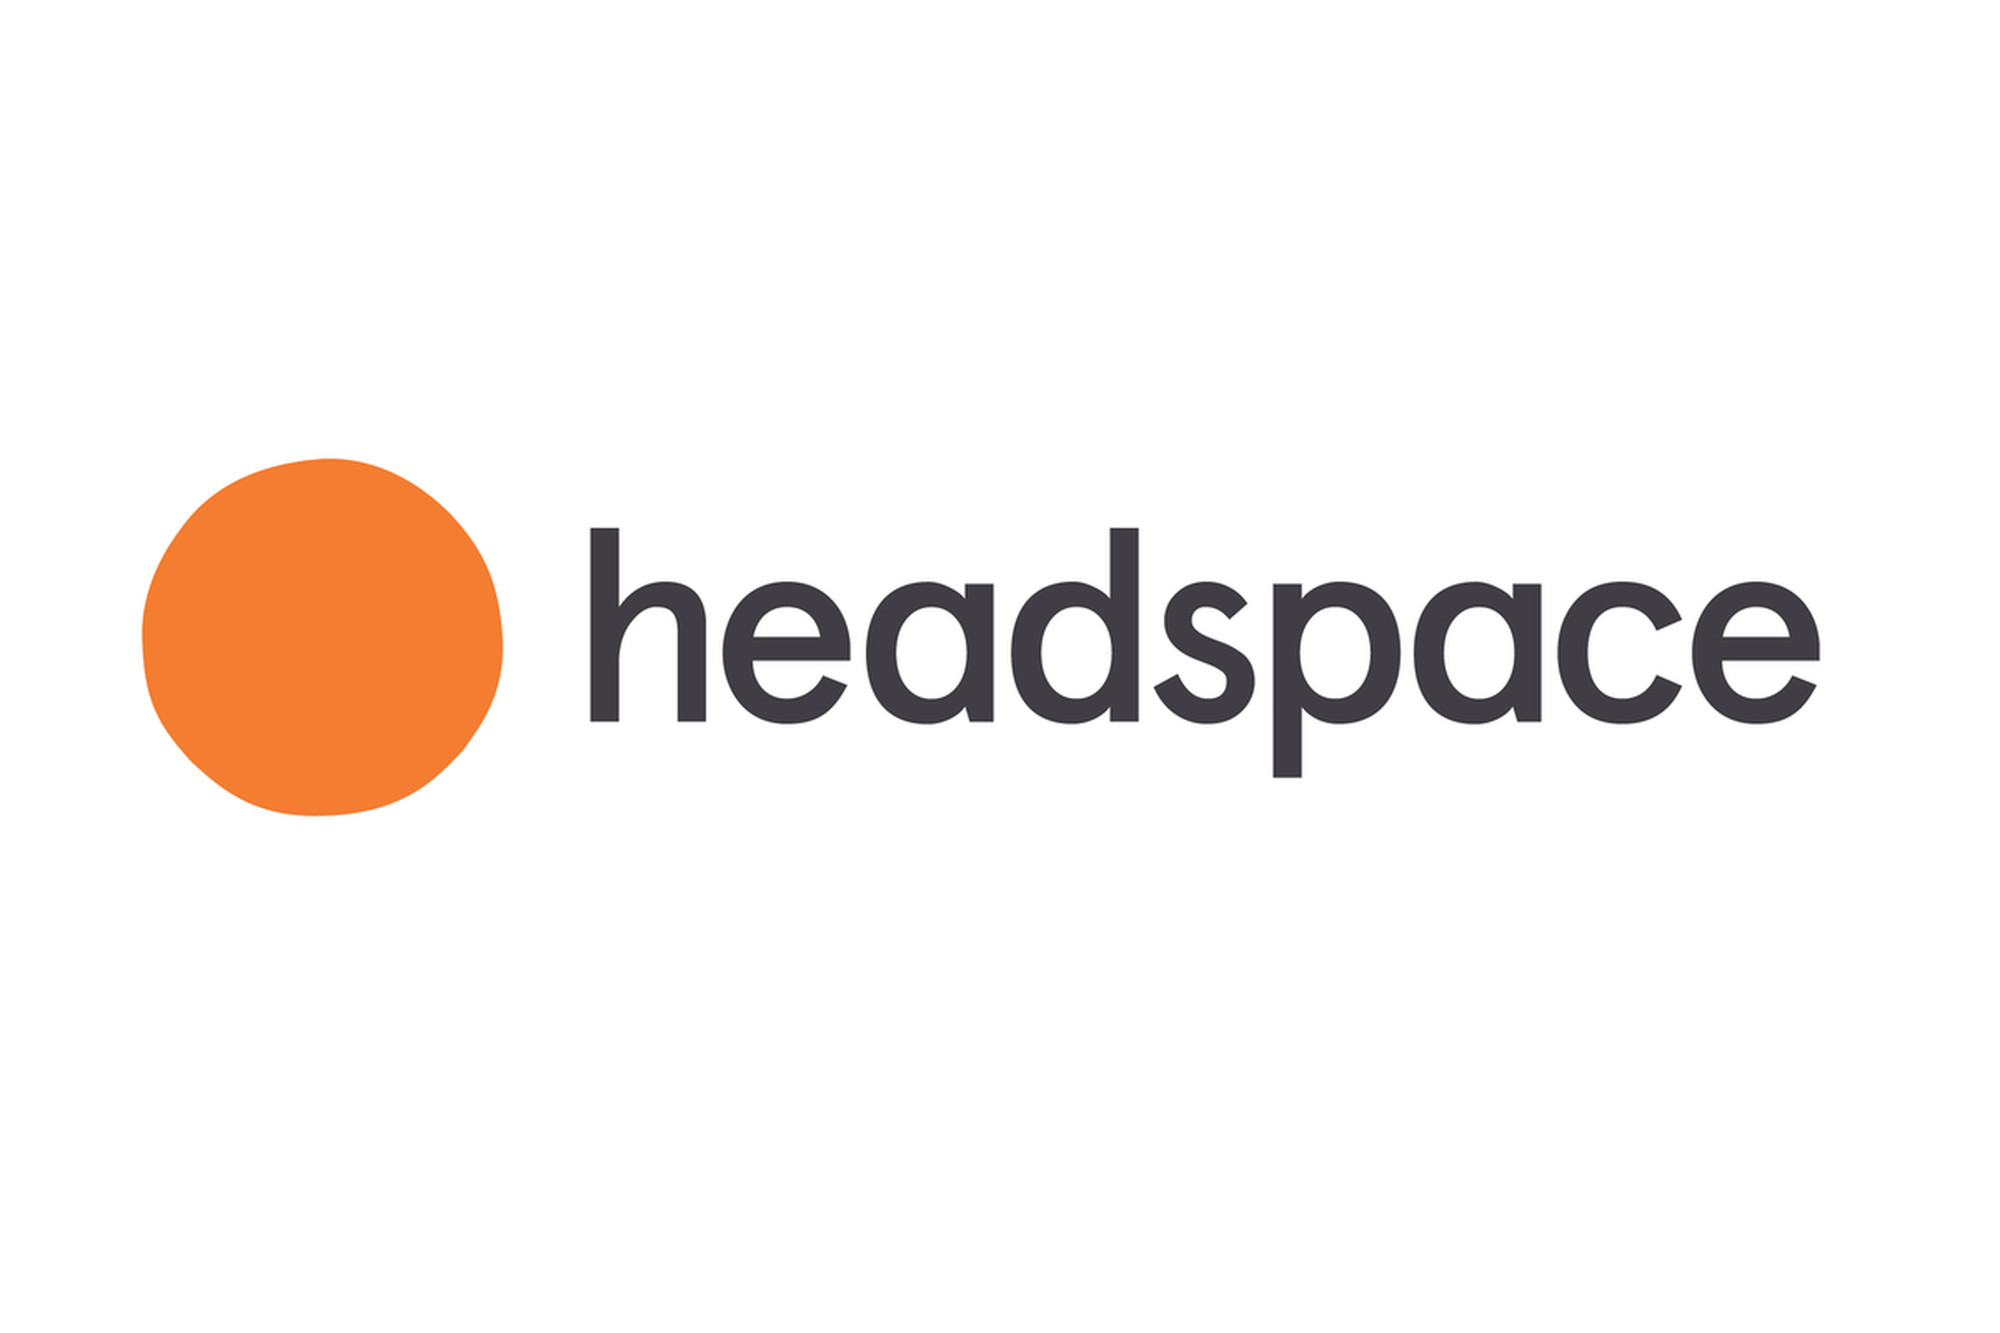 Headspace Health expands mental healthcare services to international markets - Workplace Wellbeing Professional